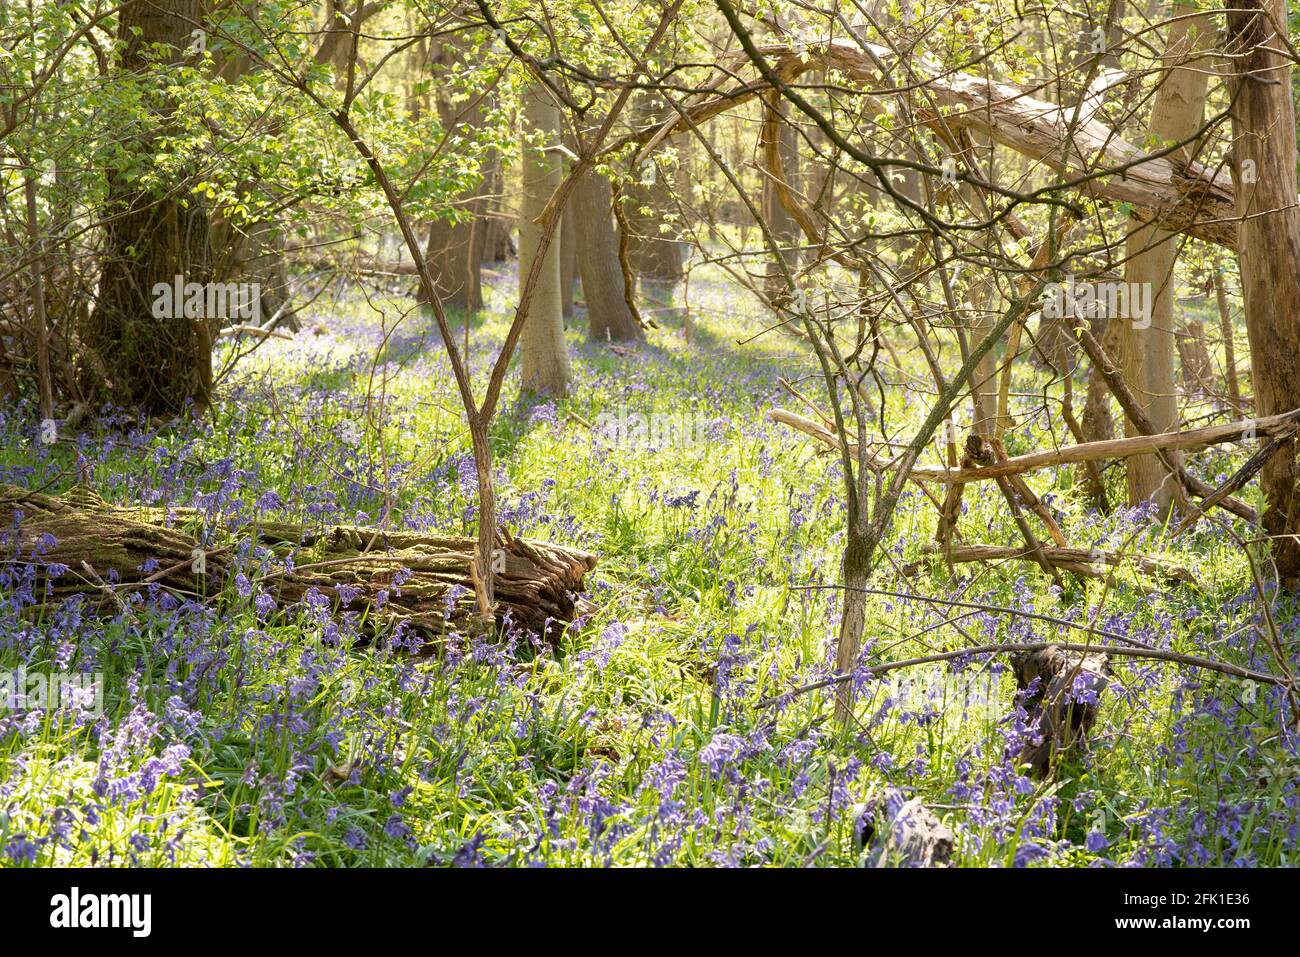 English landscape with forecast in spring and bluebells flowers, Chiltern Hills, Buckinghamshire, UK Stock Photo